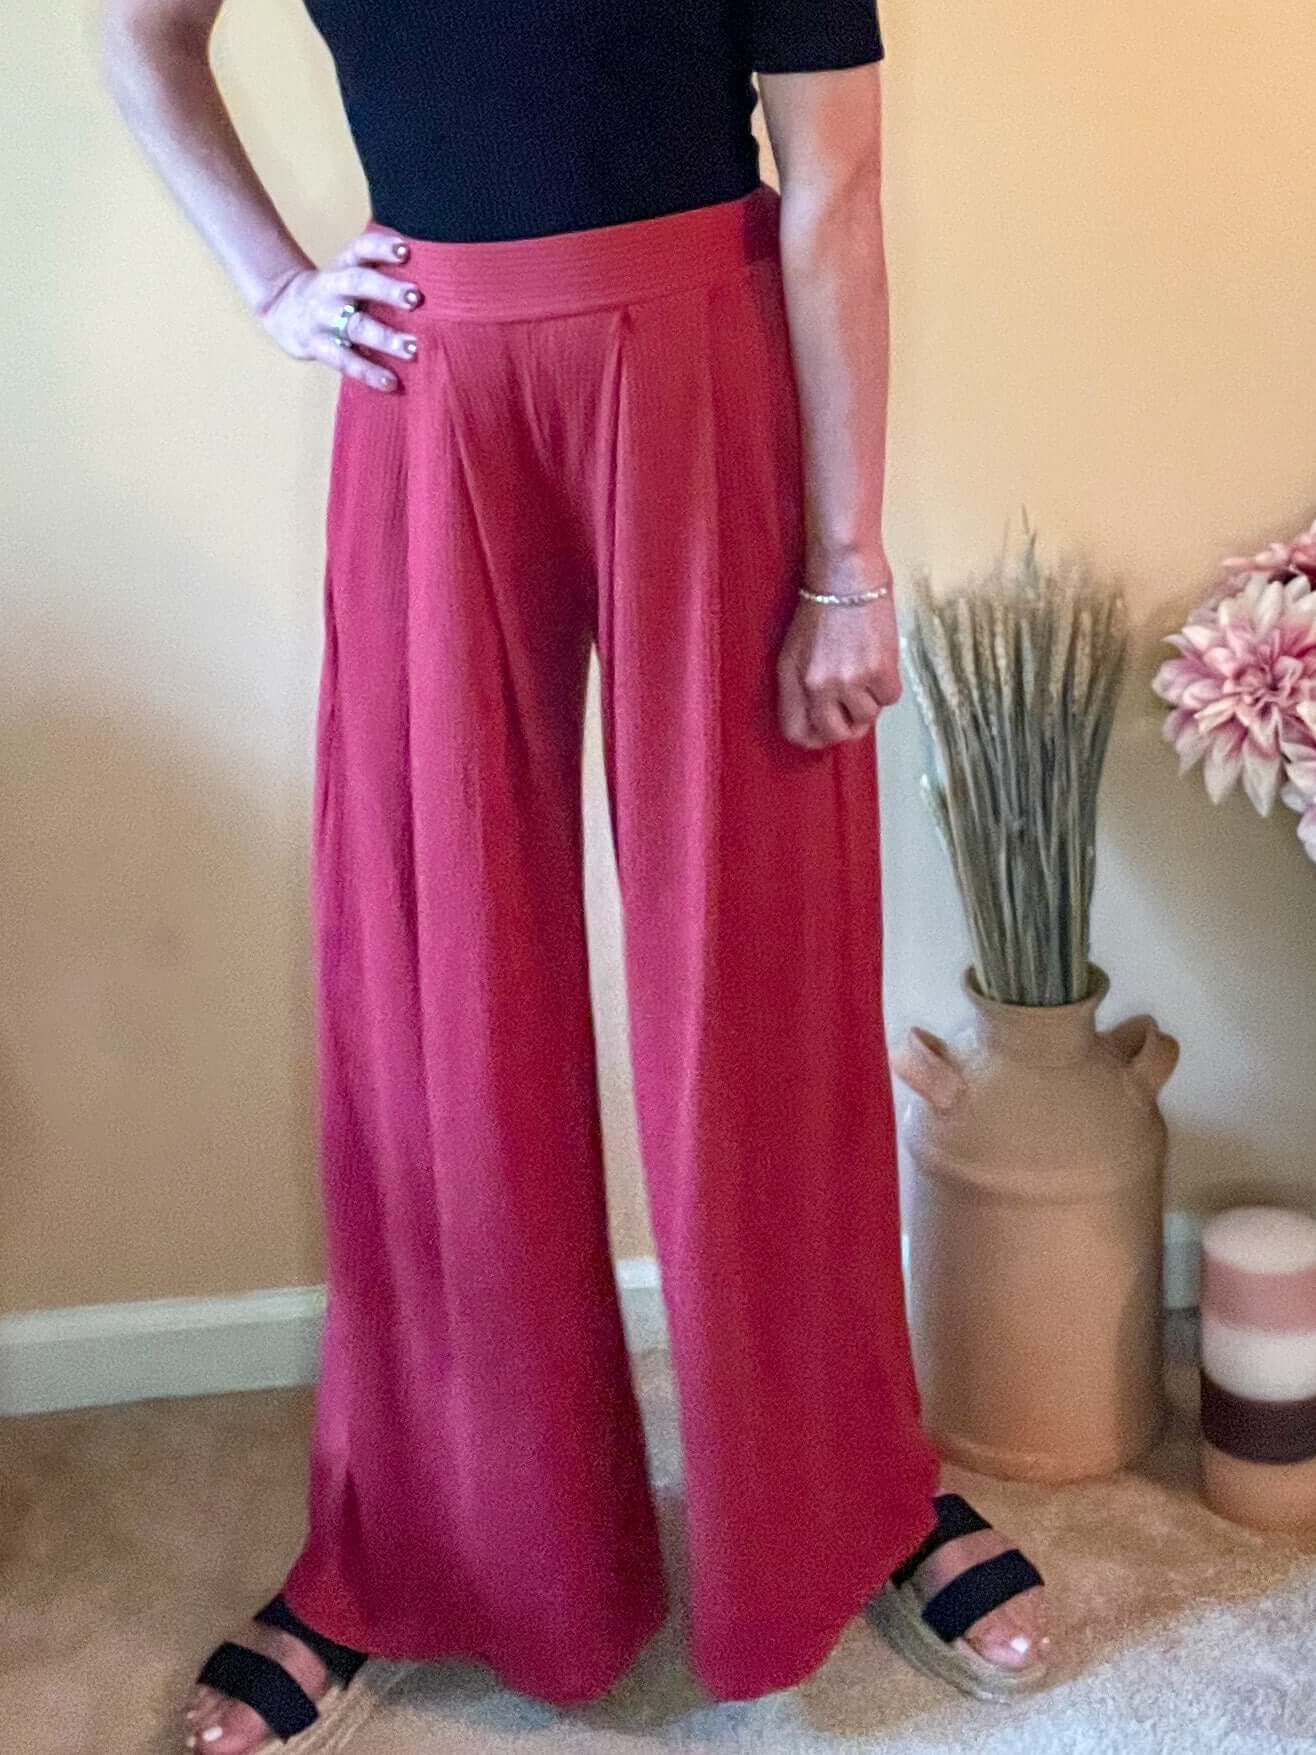 Wide Leg Pants clothing, elastic waist pant, high rise pants, Lookin' Chic Wide Leg Pants, pleated front, Resort style pants, ribbed pants, soft ribbed fabric, wide leg pants Size: Small, Medium, Large, XL